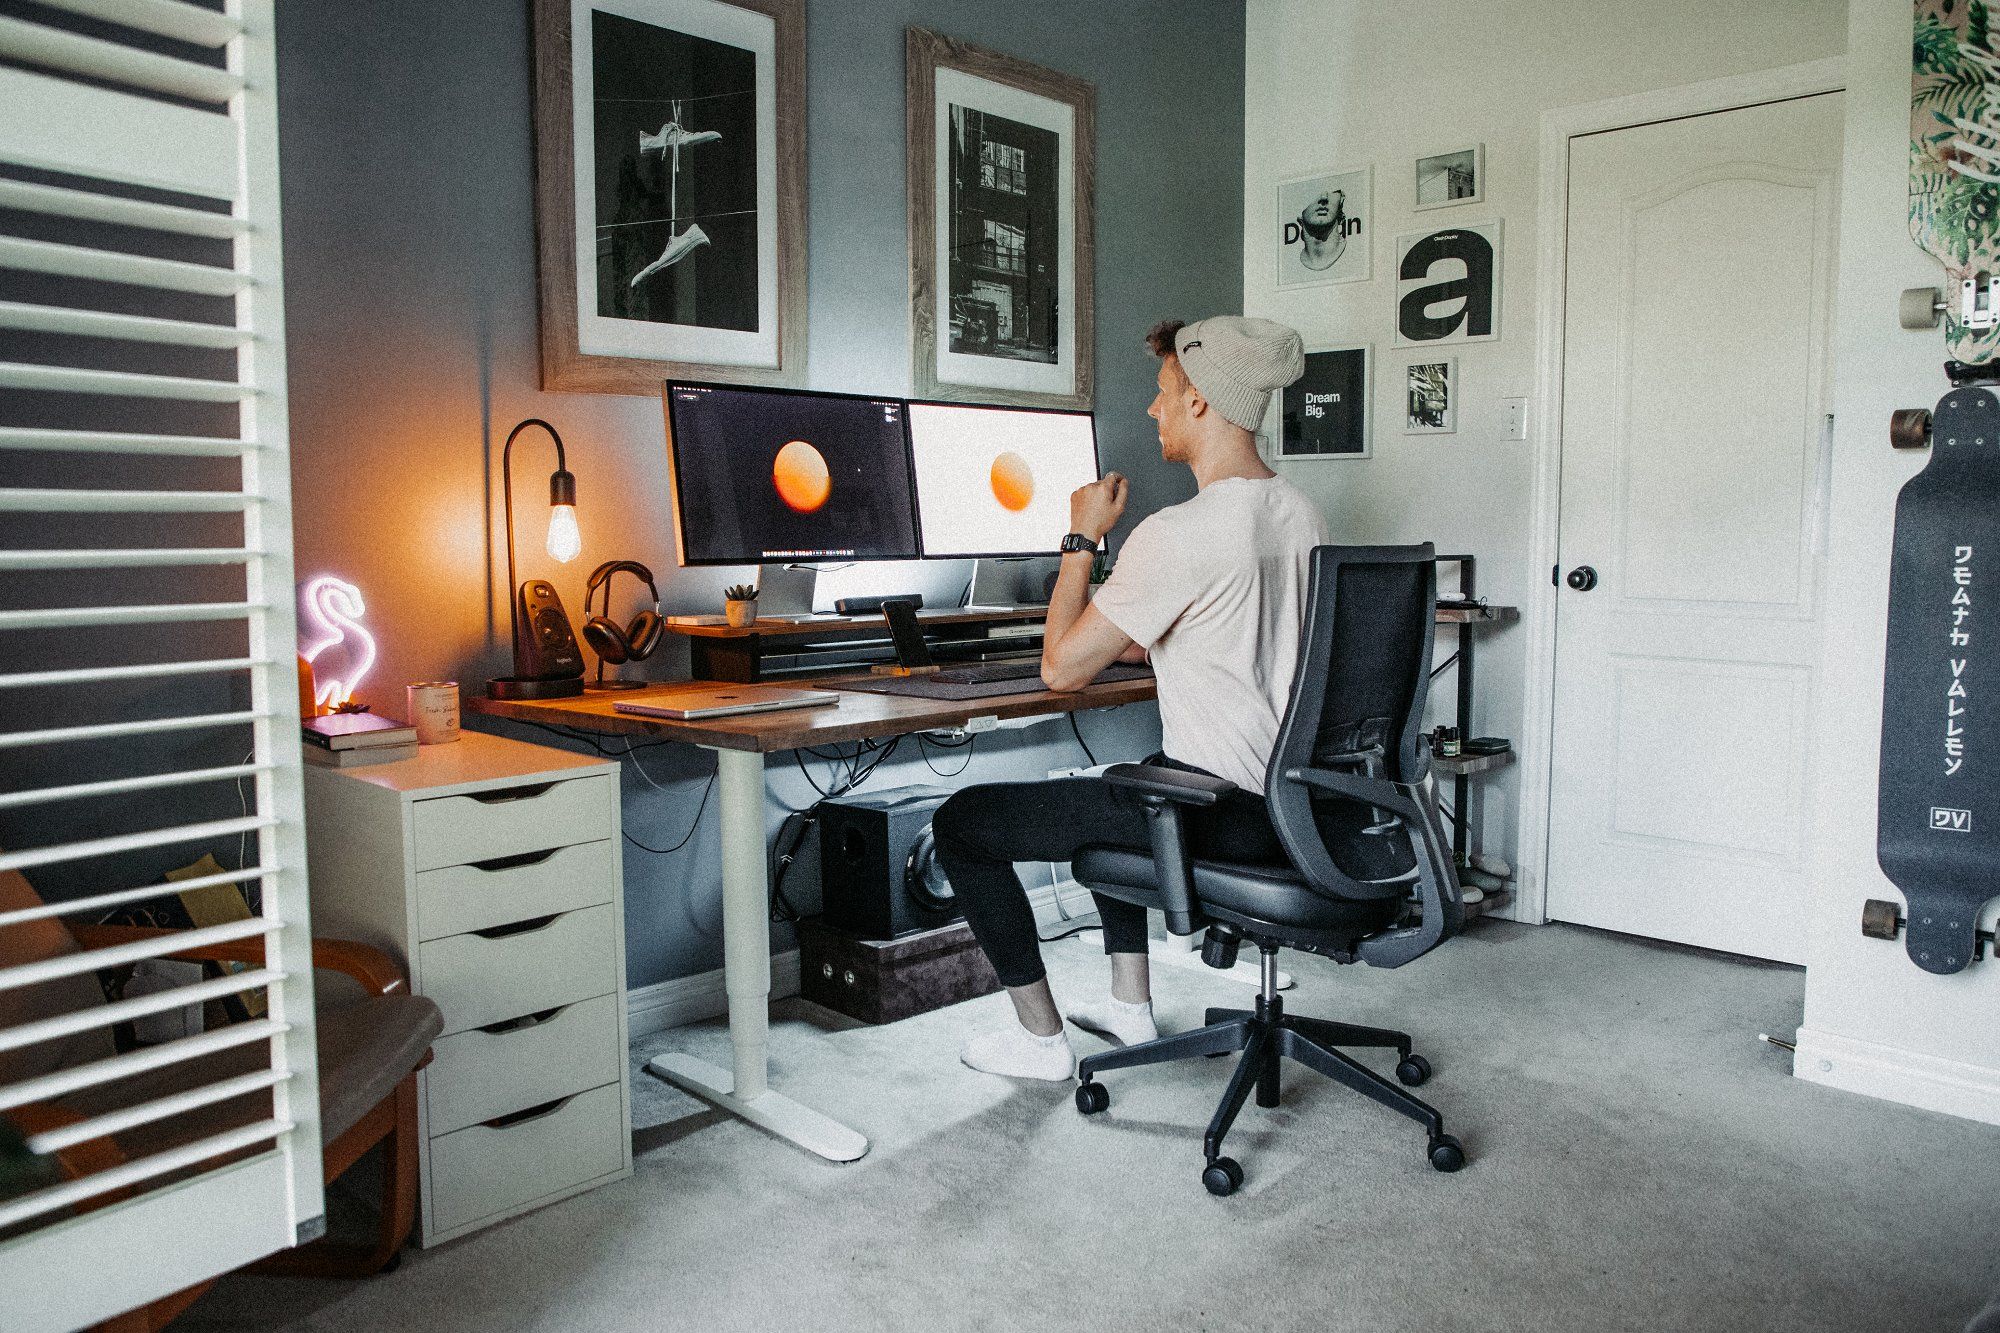 A Canadian-based freelance video editor and designer Kevin Walton at their home workstation